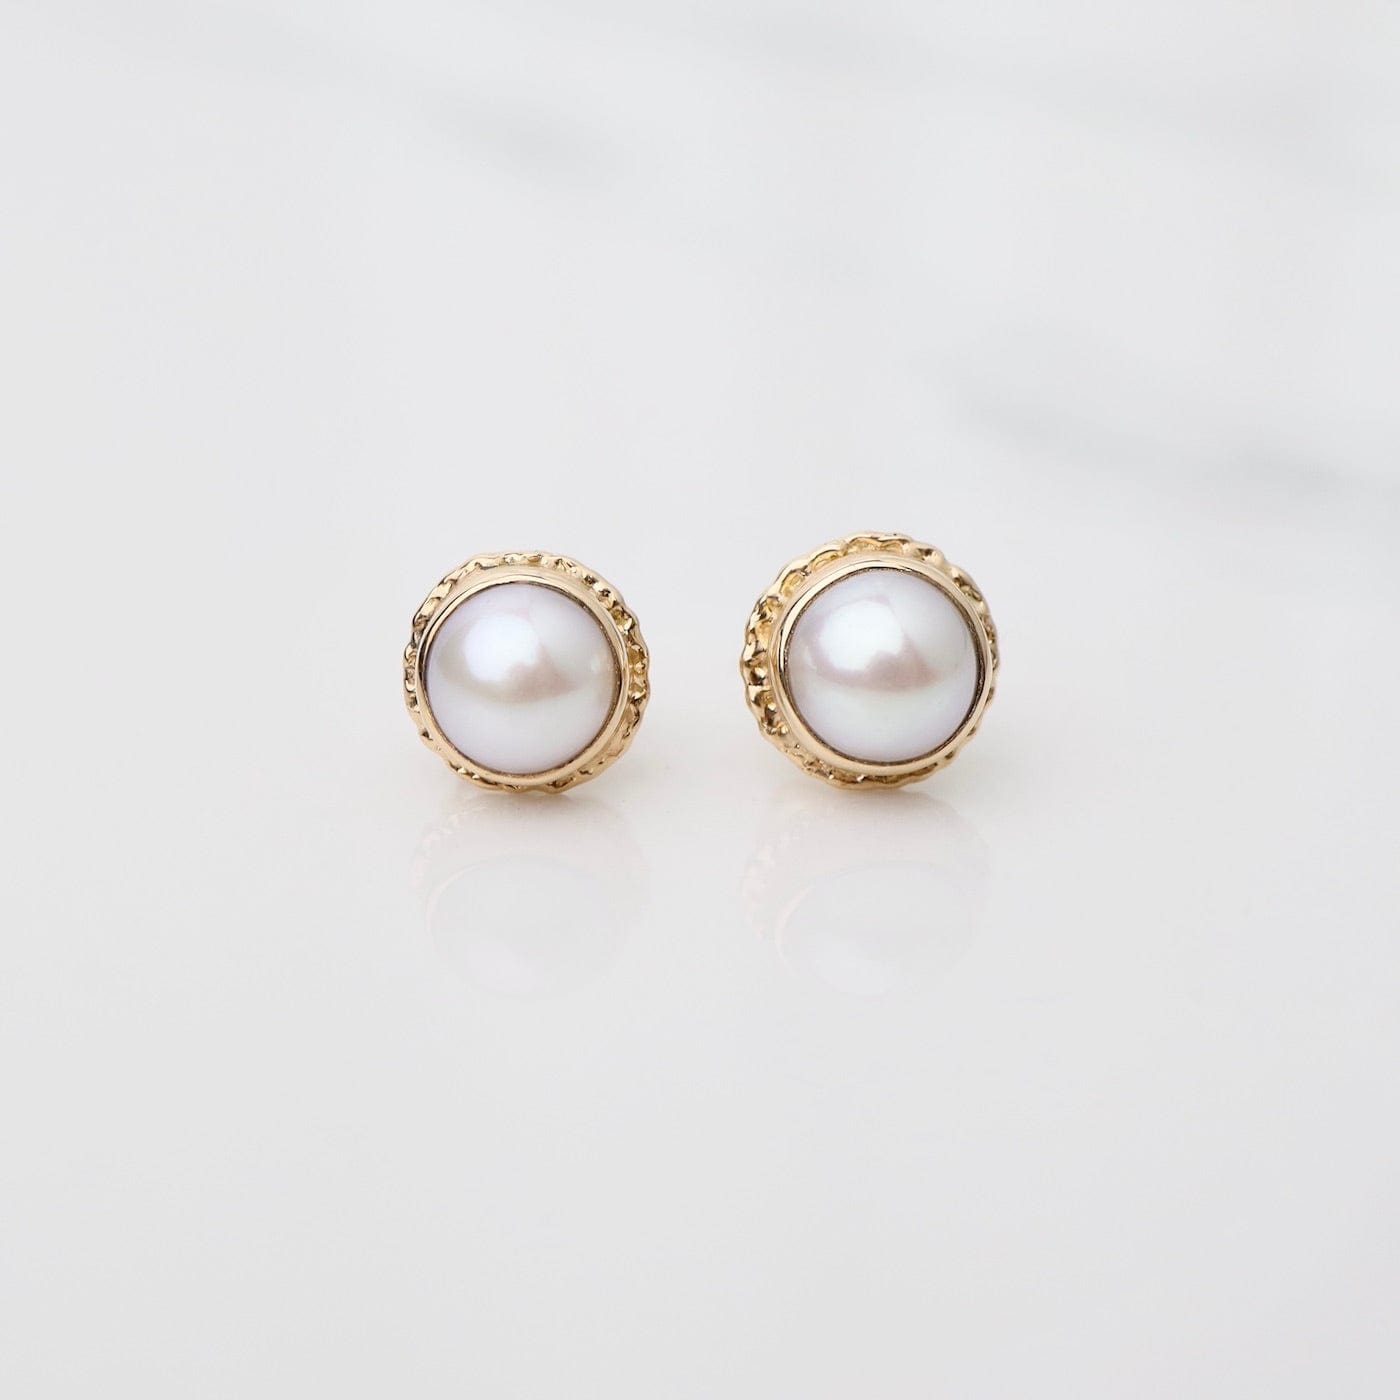 EAR-14K 114K Gold Post Earrings with 6mm Round Cultured Pe